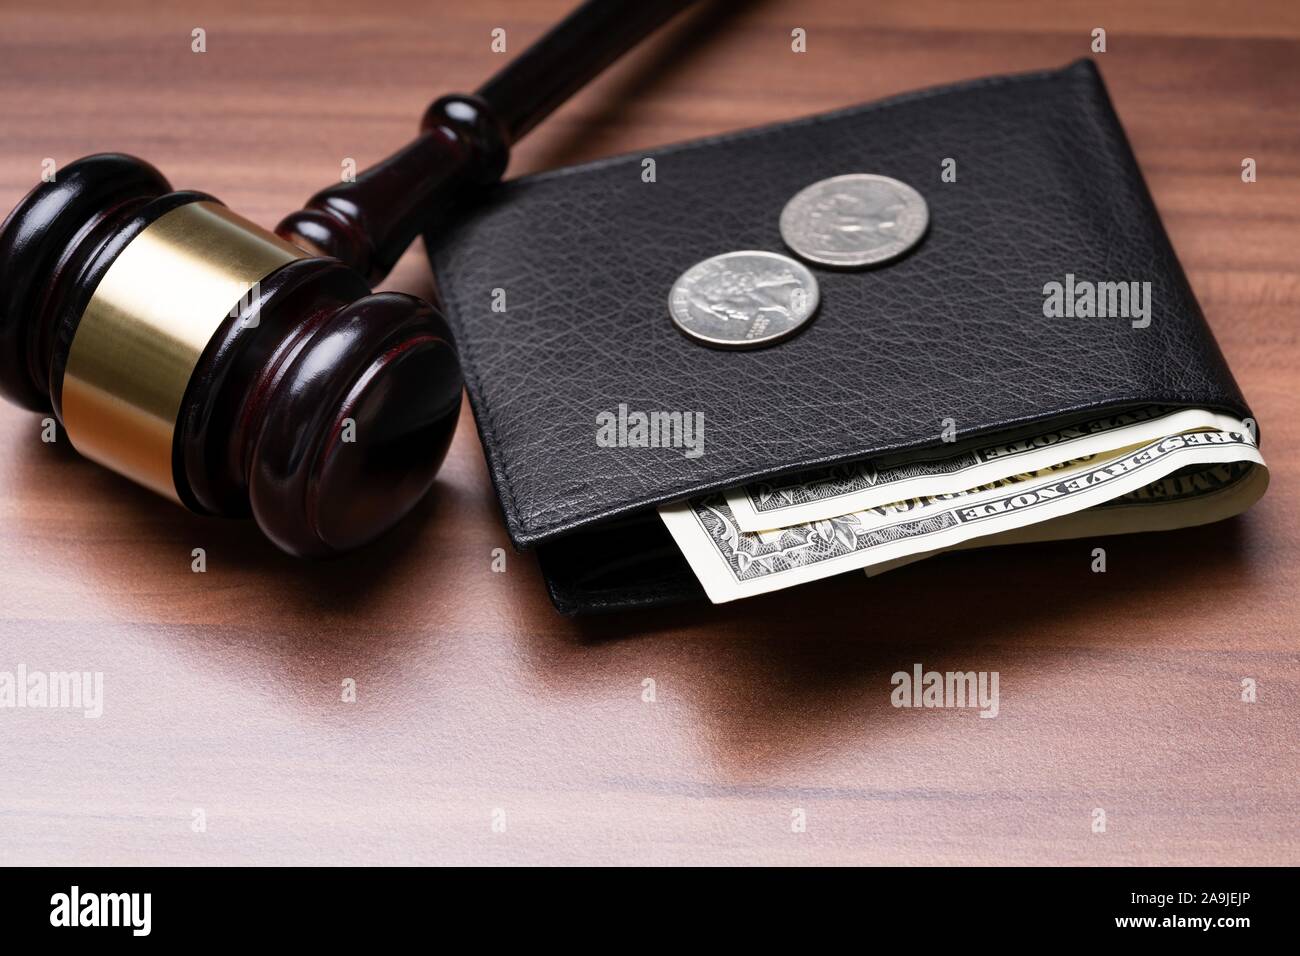 Black Leather Pocket With Banknotes And Coins Near Judge Gavel Over Wooden Desk Stock Photo